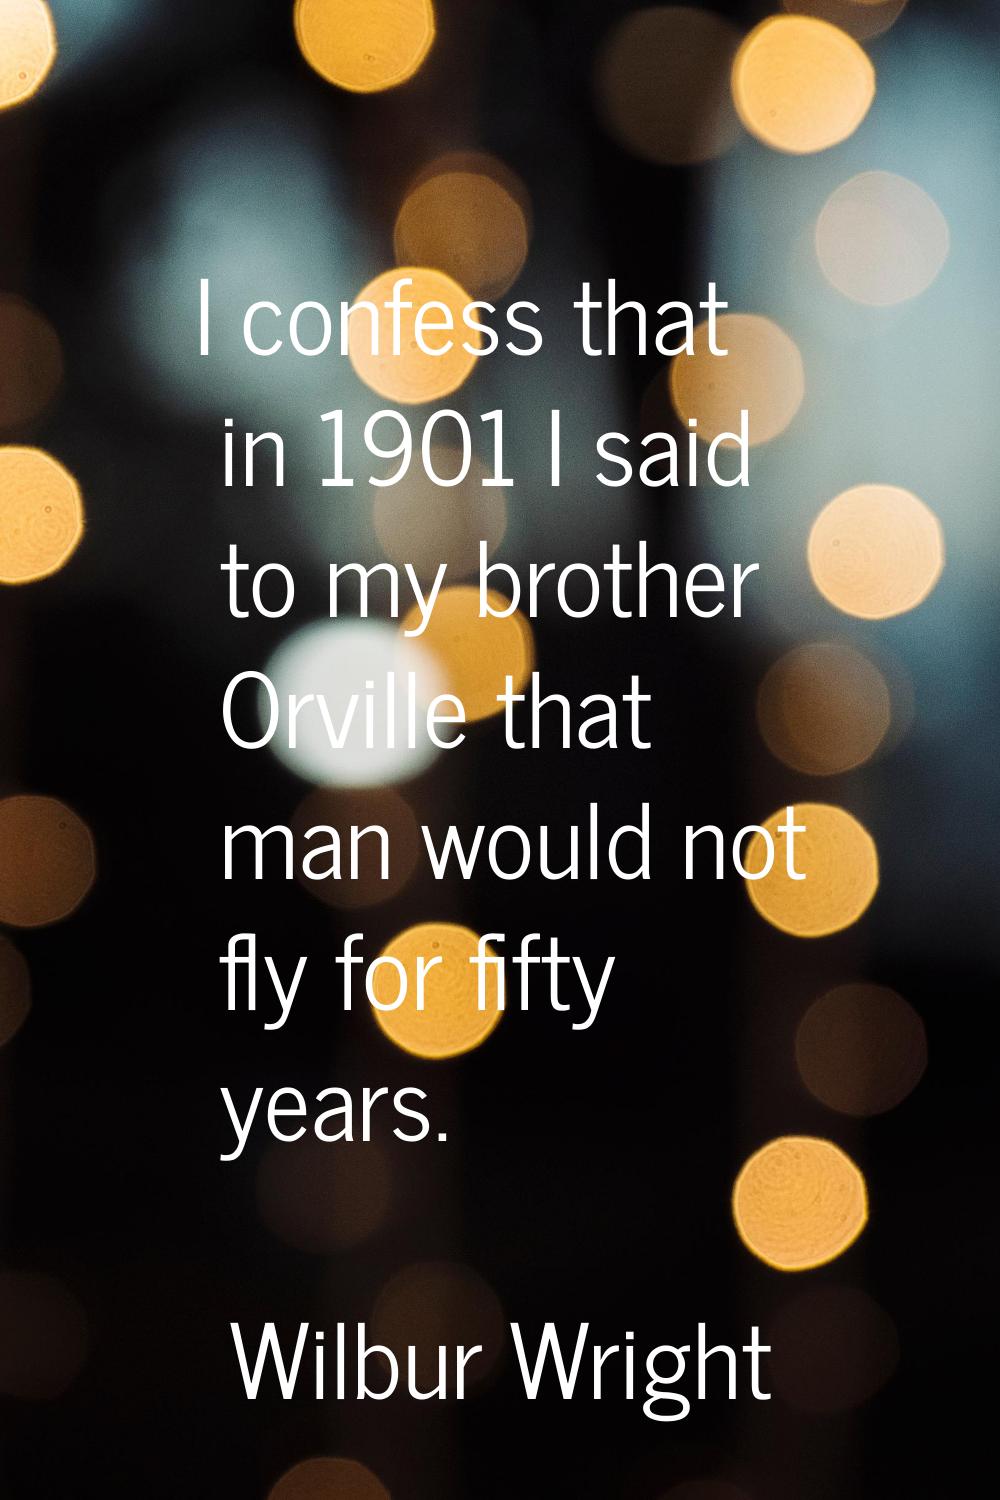 I confess that in 1901 I said to my brother Orville that man would not fly for fifty years.